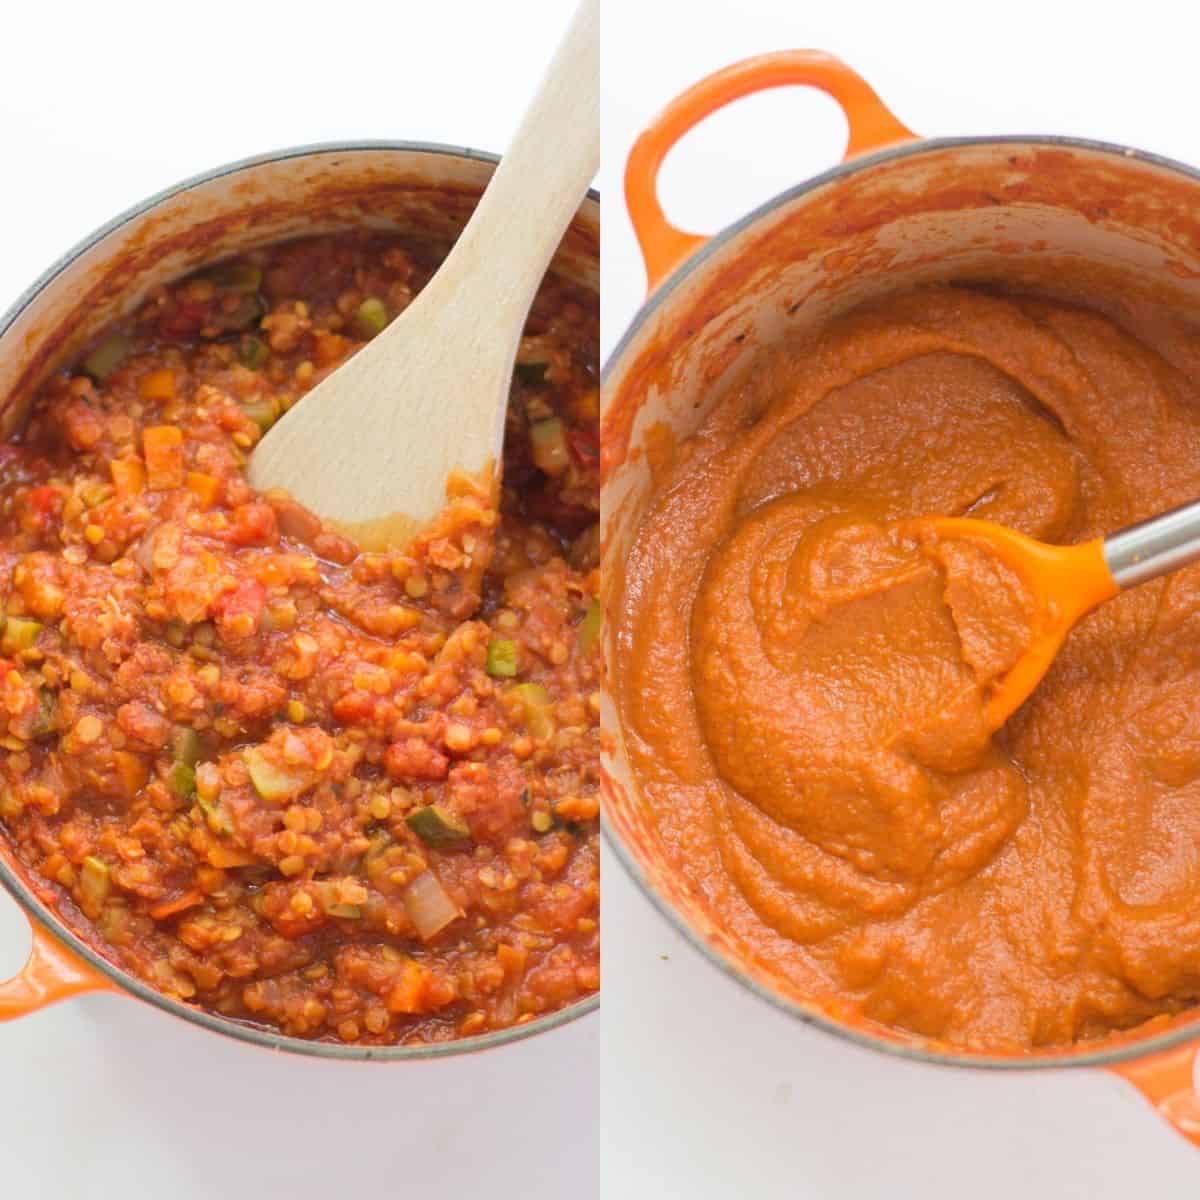 on the left pasta sauce before blending and blended sauce on the right